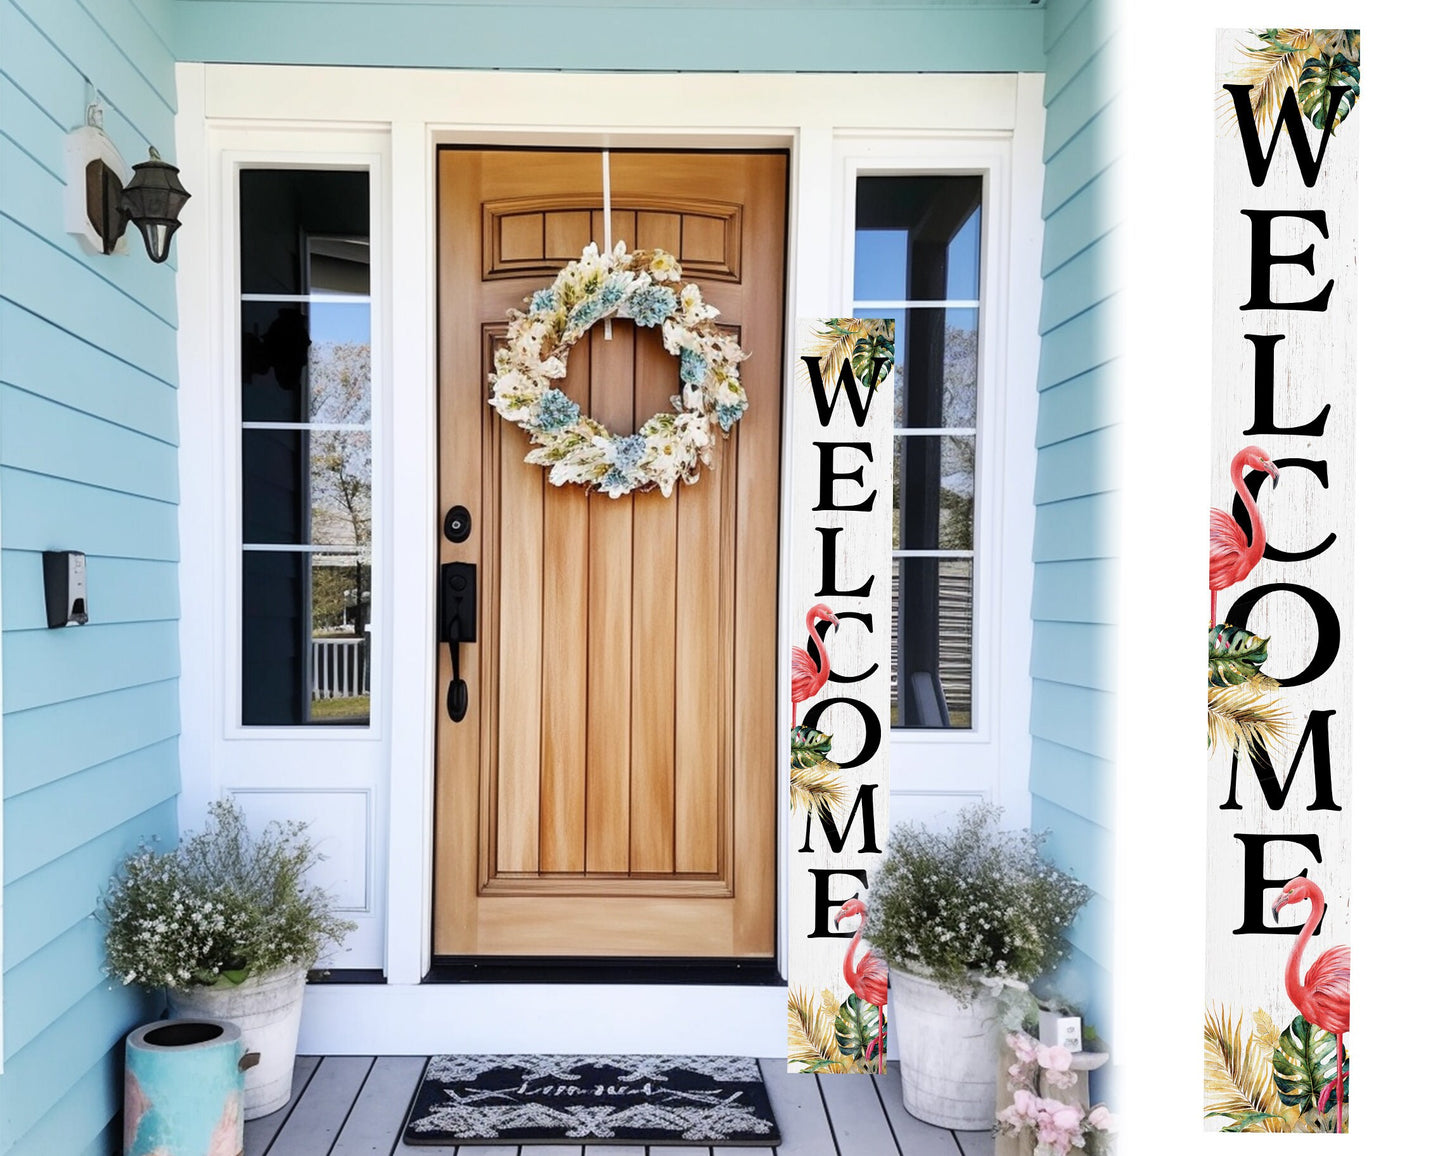 72in Outdoor Welcome Sign for Front Door Porch Decor - Coastal Welcome Sign for Farmhouse Home Decorations - Big Summer Welcome Board